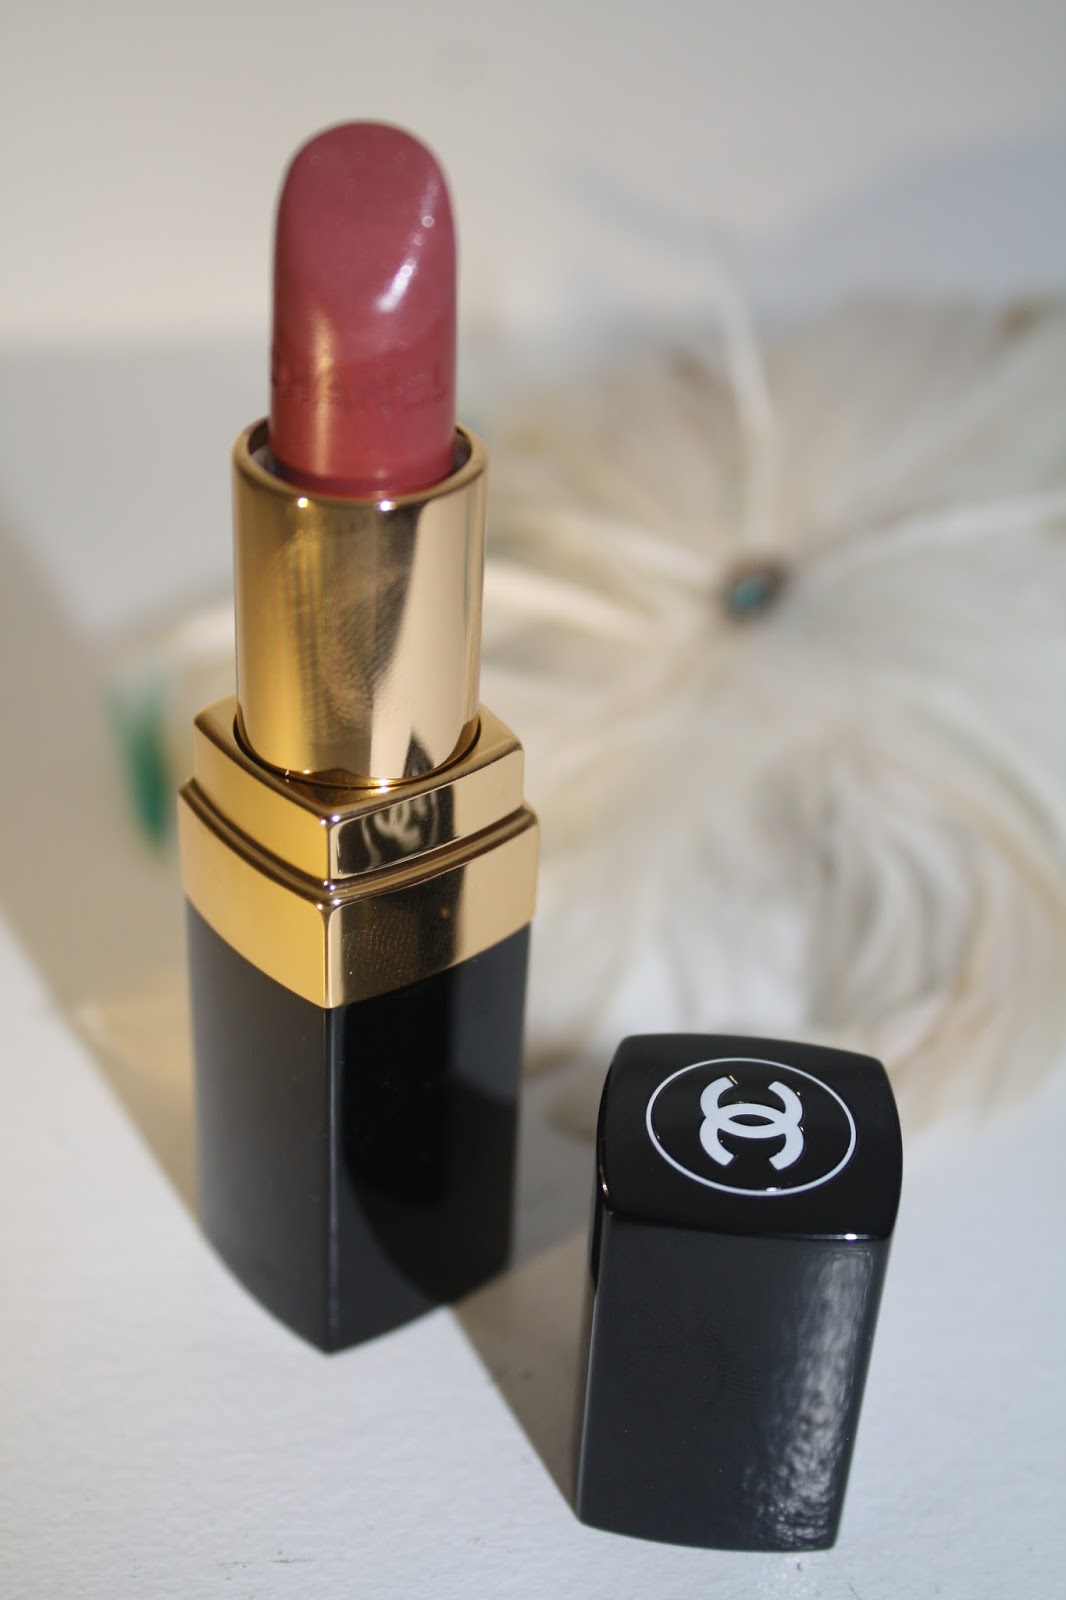 CHANEL Rouge Coco Lip Colour - Mademoiselle - Reviews